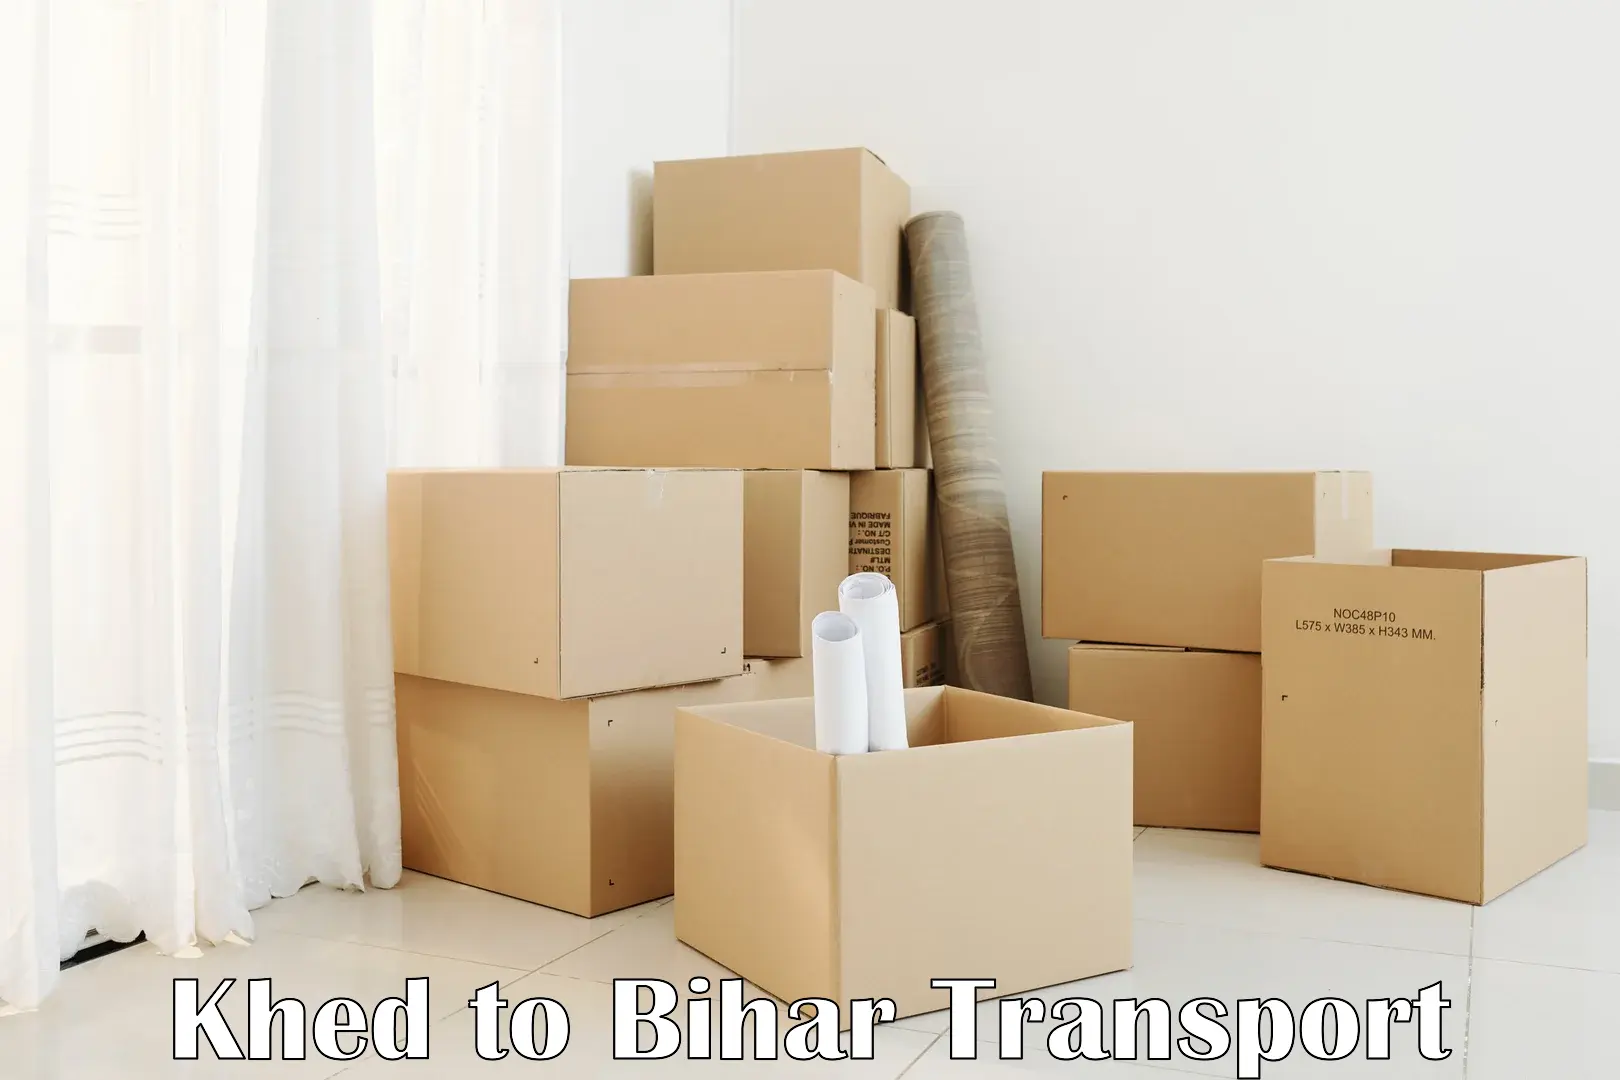 Lorry transport service Khed to Bihar